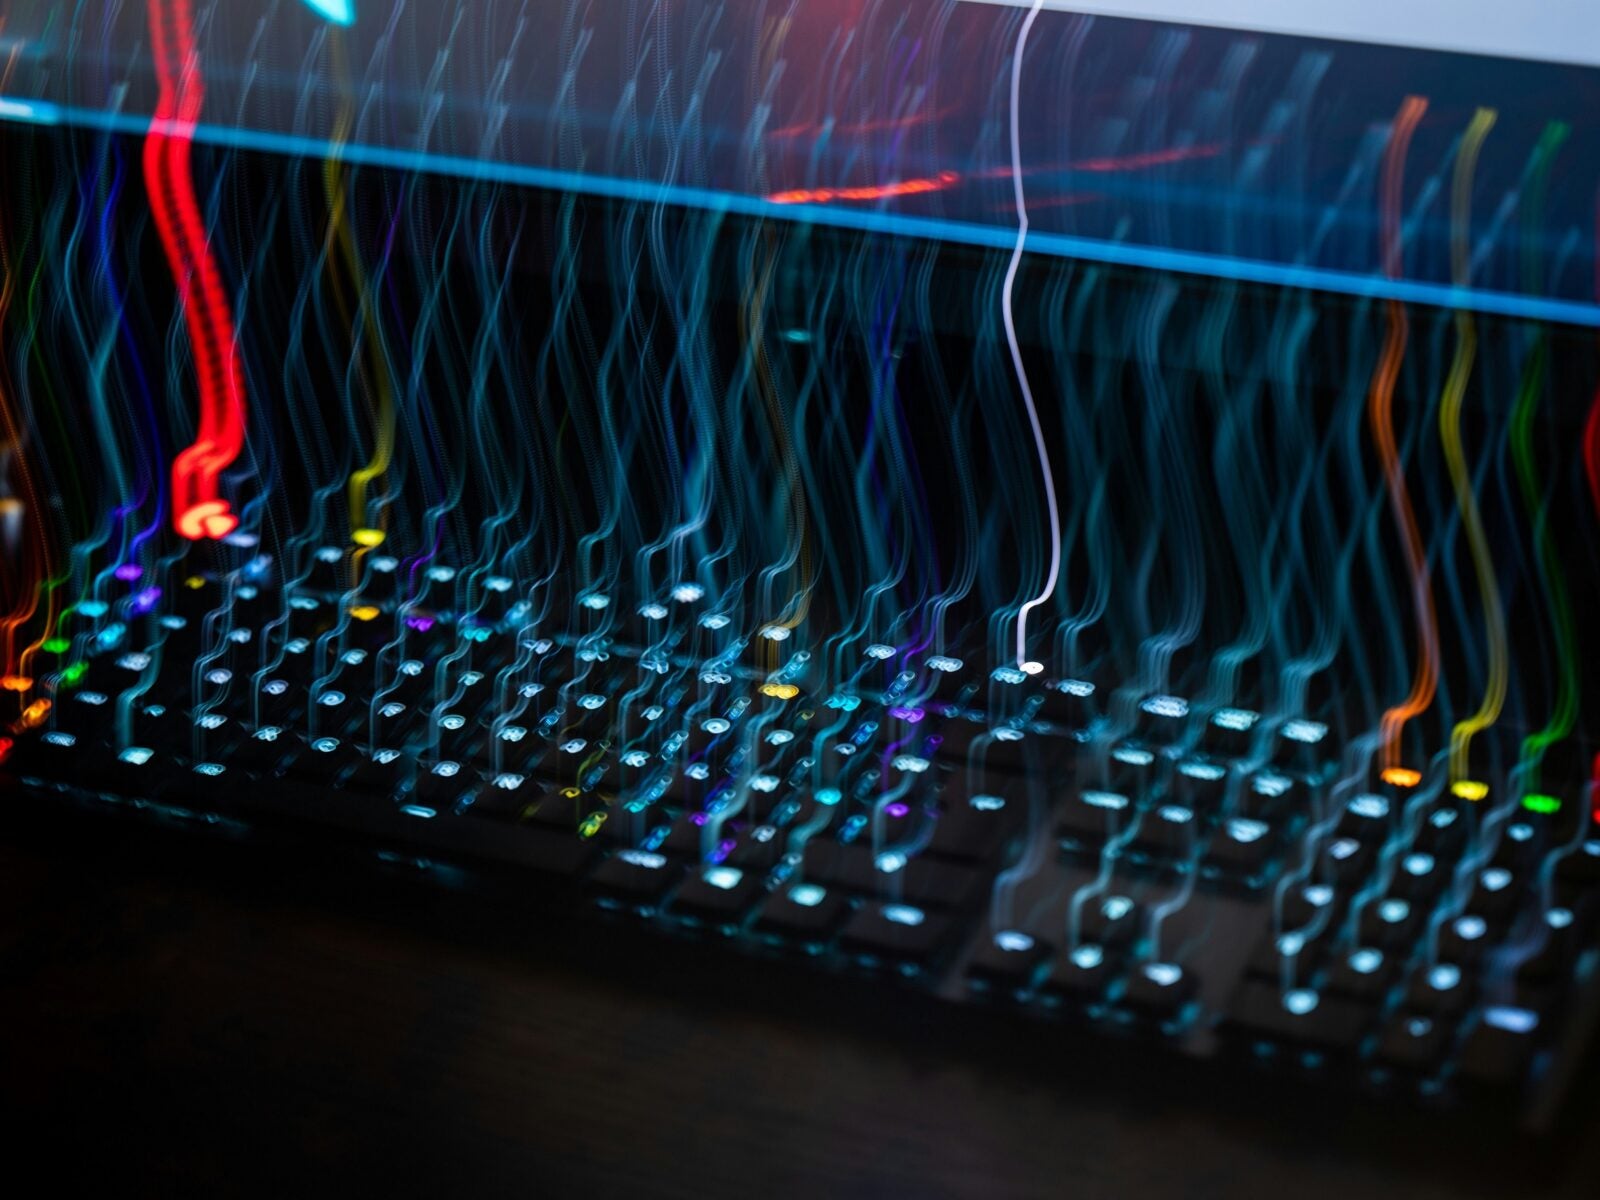 a close up of a computer keyboard with colorful lights
Photo by Adrien on Unsplash
